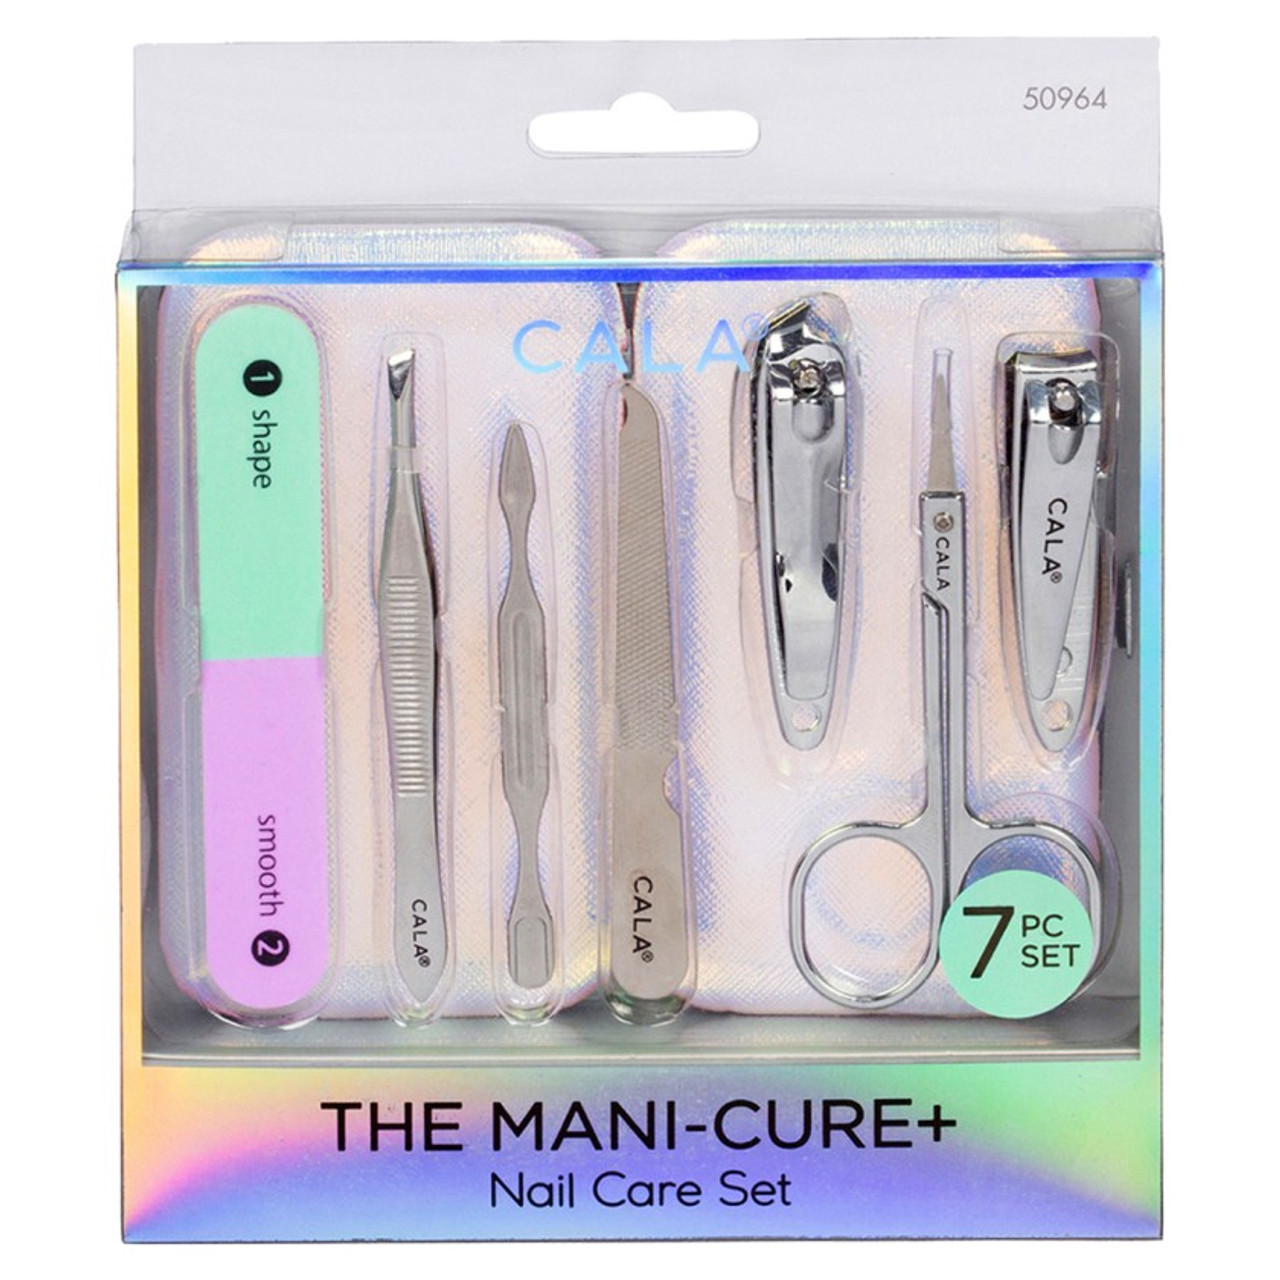 https://cdn11.bigcommerce.com/s-djp6s5xq1z/images/stencil/1280x1280/products/1417/4985/Manicure-and-Nail-Care-Set-Silver__14718.1654122870.jpg?c=2